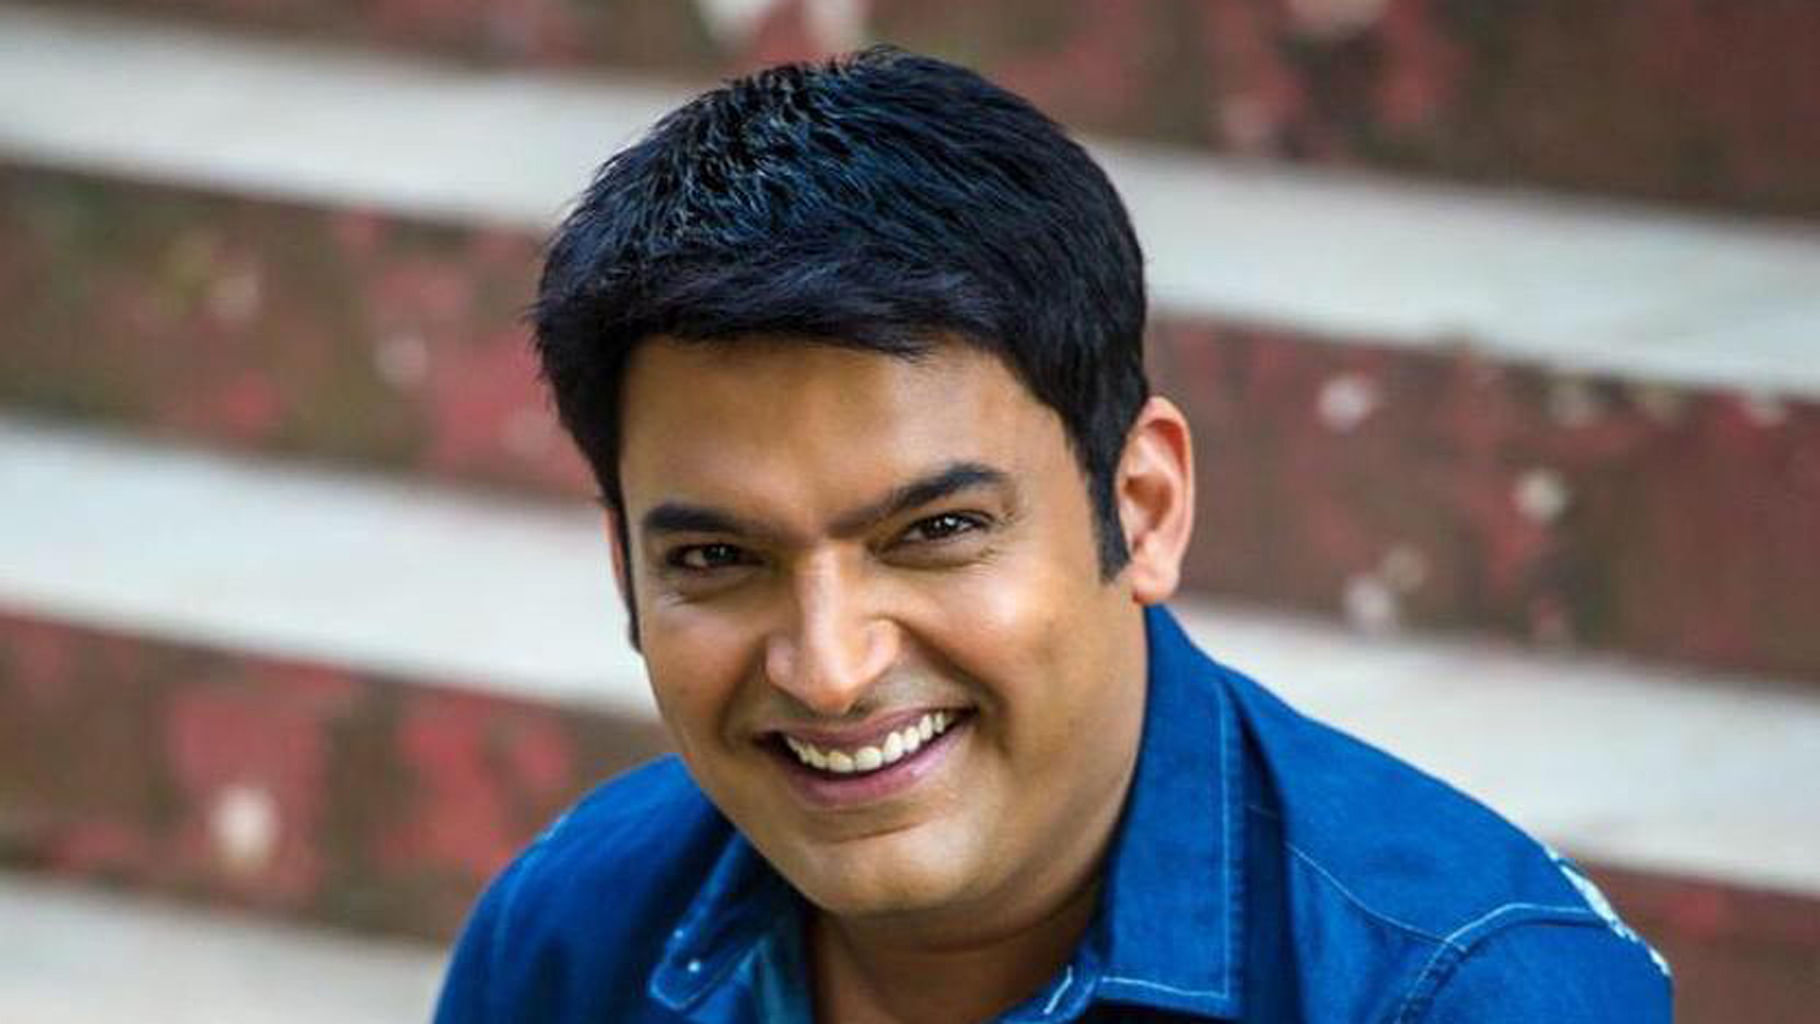 Kapil Sharma accused officials of the corporation of taking a bribe of Rs 5 lakh. (Photo Courtesy: Facebook<a href="https://scontent-sit4-1.xx.fbcdn.net/v/t1.0-9/11218943_1039473349416582_2229040609512720823_n.jpg?oh=20bc72a677b3dca67444419b6a7f39b3&amp;oe=584BA767">/Kapil Sharma</a>)